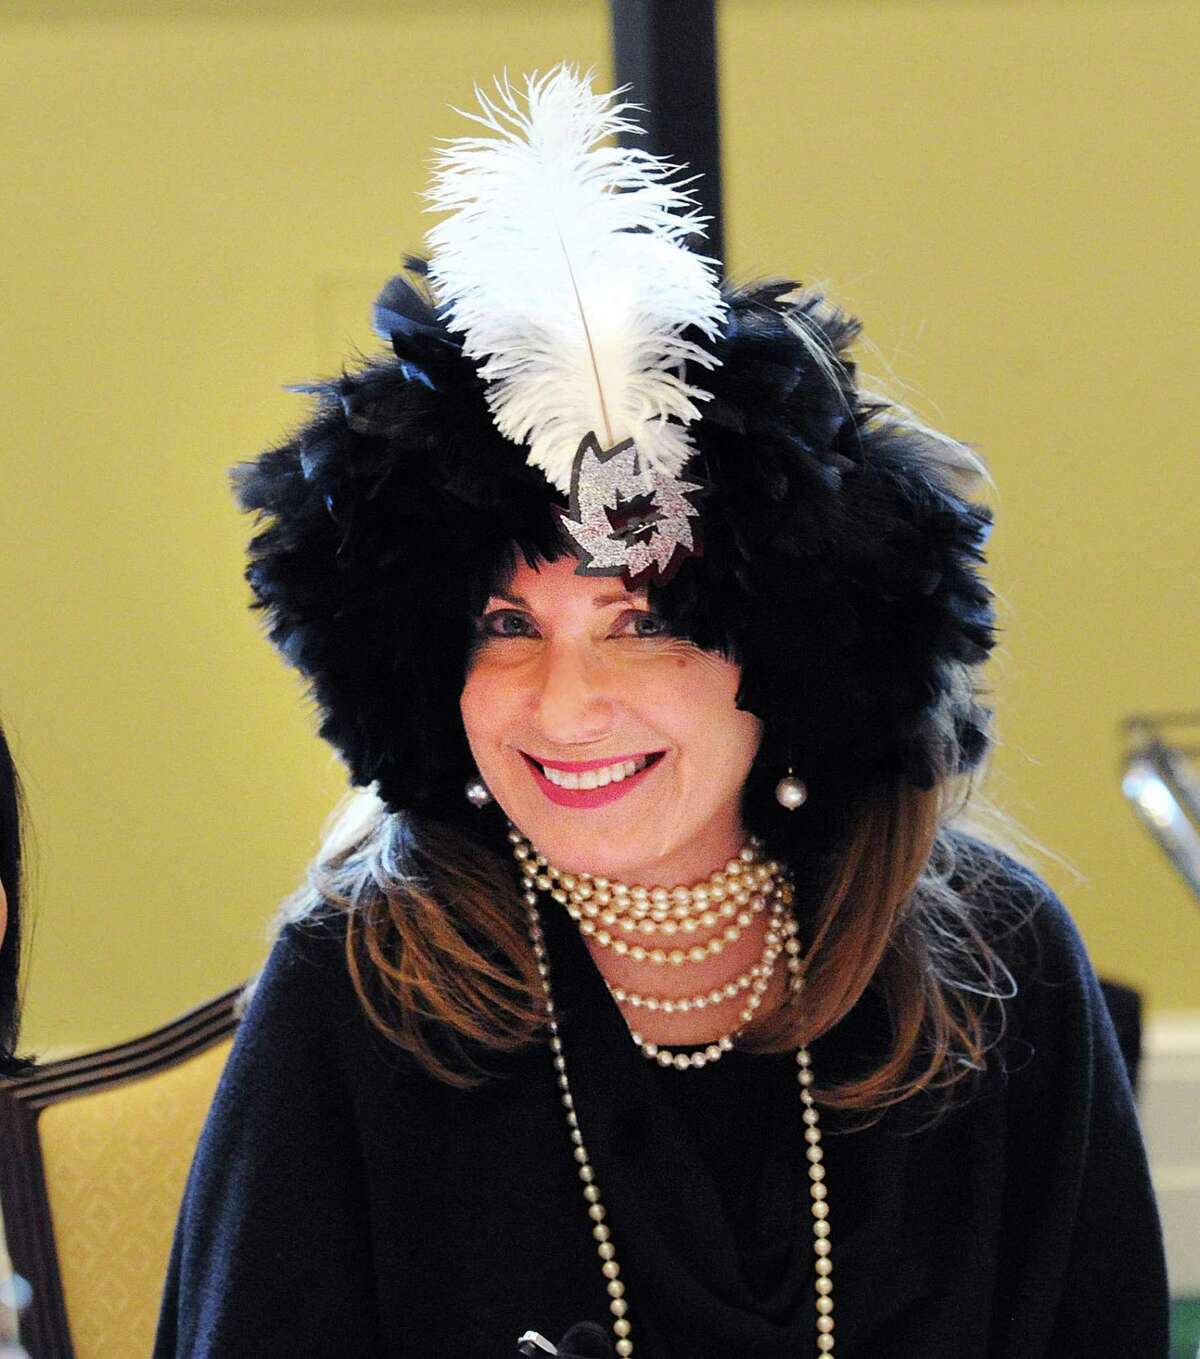 Victoria Sybelnik of Stirling Health Care wore a fortune-teller costume during the Murder Mystery Dinner at the First Presbyterian Chruch in Greenwich, Conn., Thursday, May 11, 2017. As part of the celebration of older Americans Month, the Greenwich Senior Center hosted a mafia-themed murder mystery dinner.